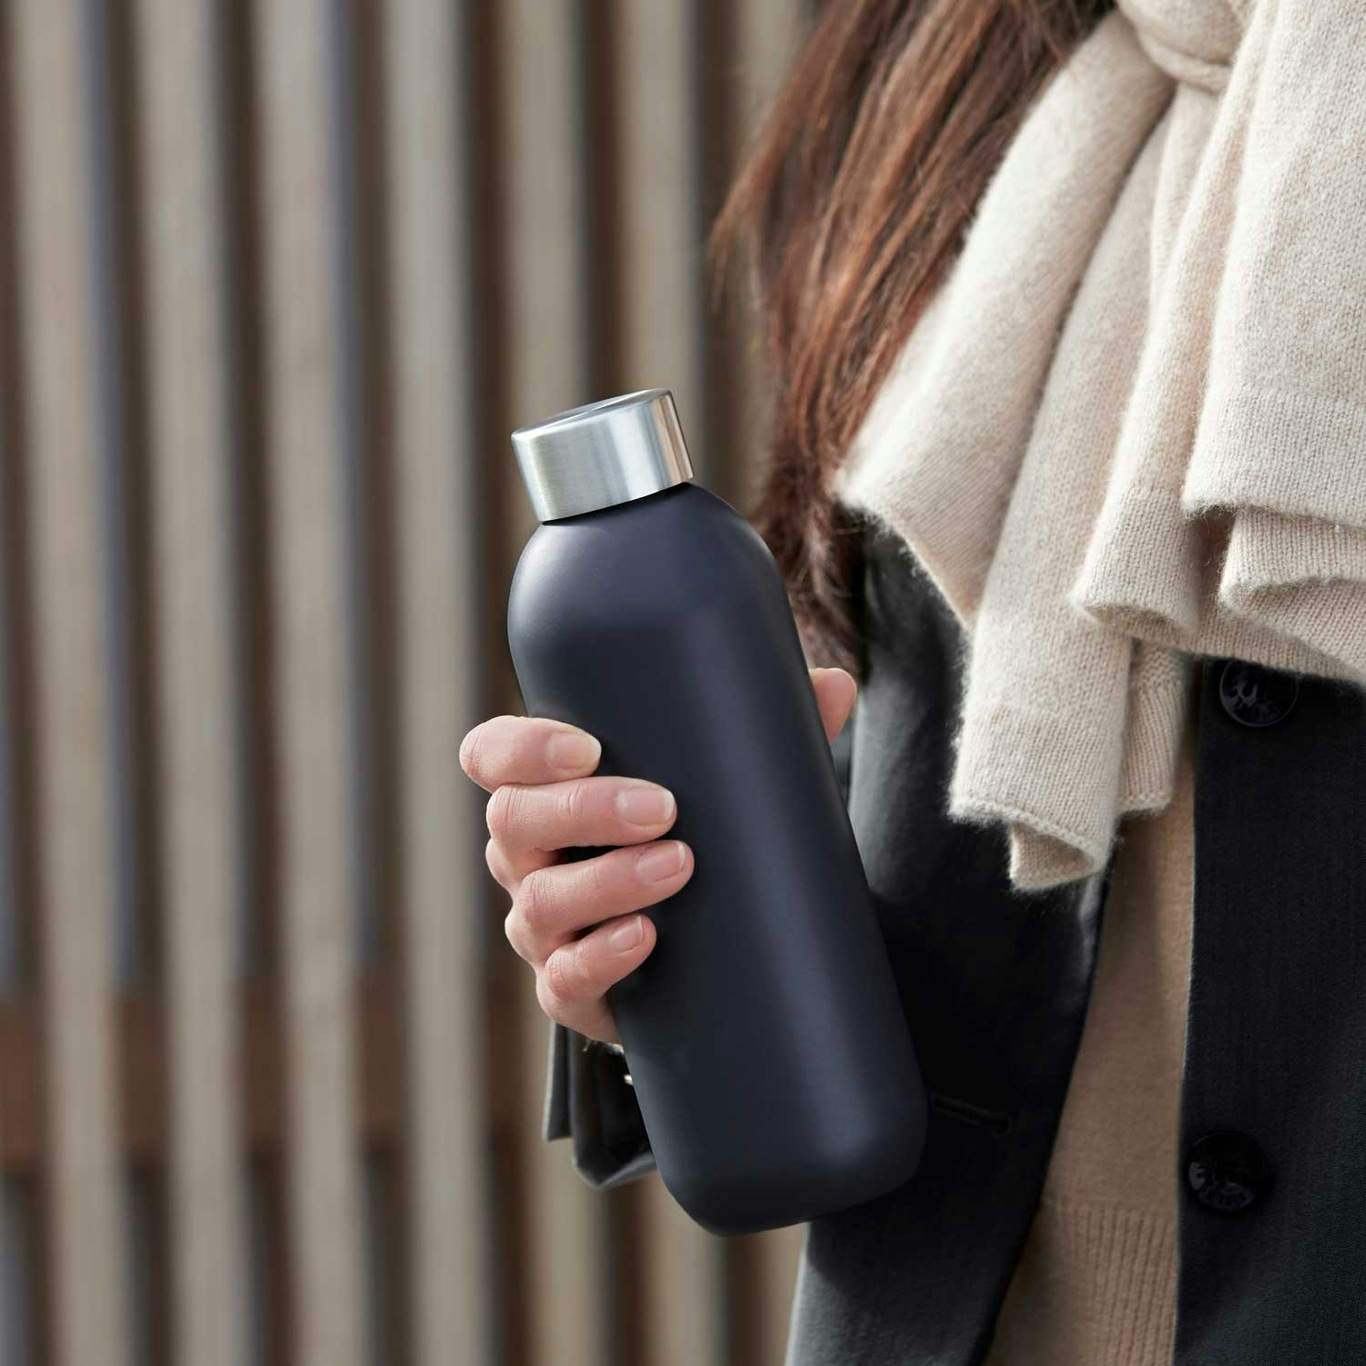 Raw Thermos Bottle 50 cl, Red - Aida @ RoyalDesign